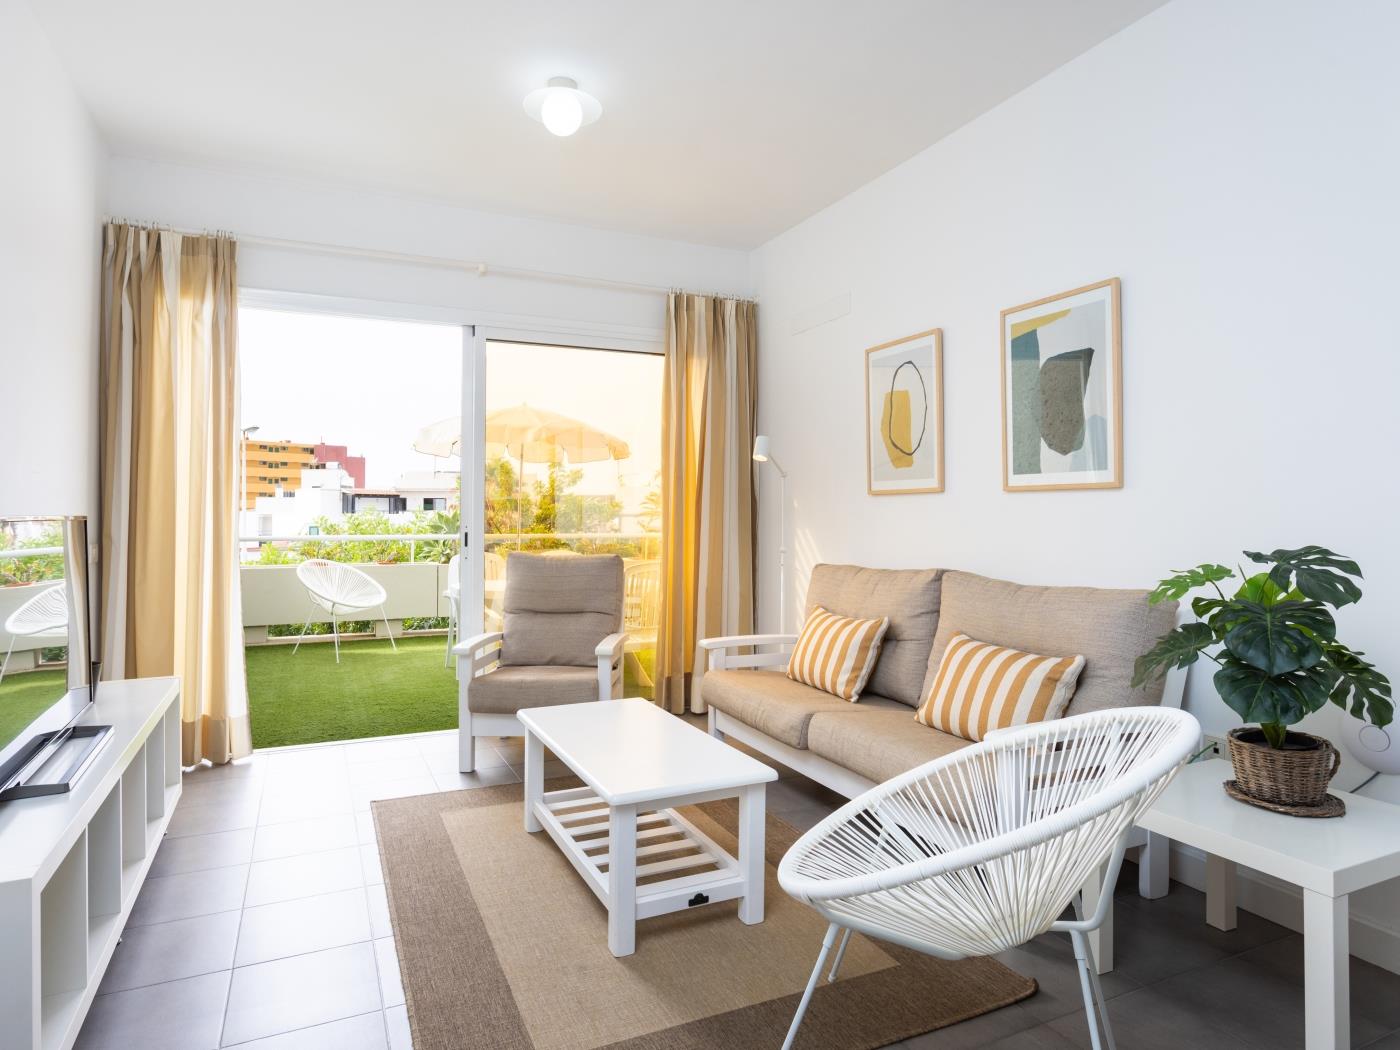 Apartment on the beach, work area and private parking - PillowAbroad in Porís de Abona